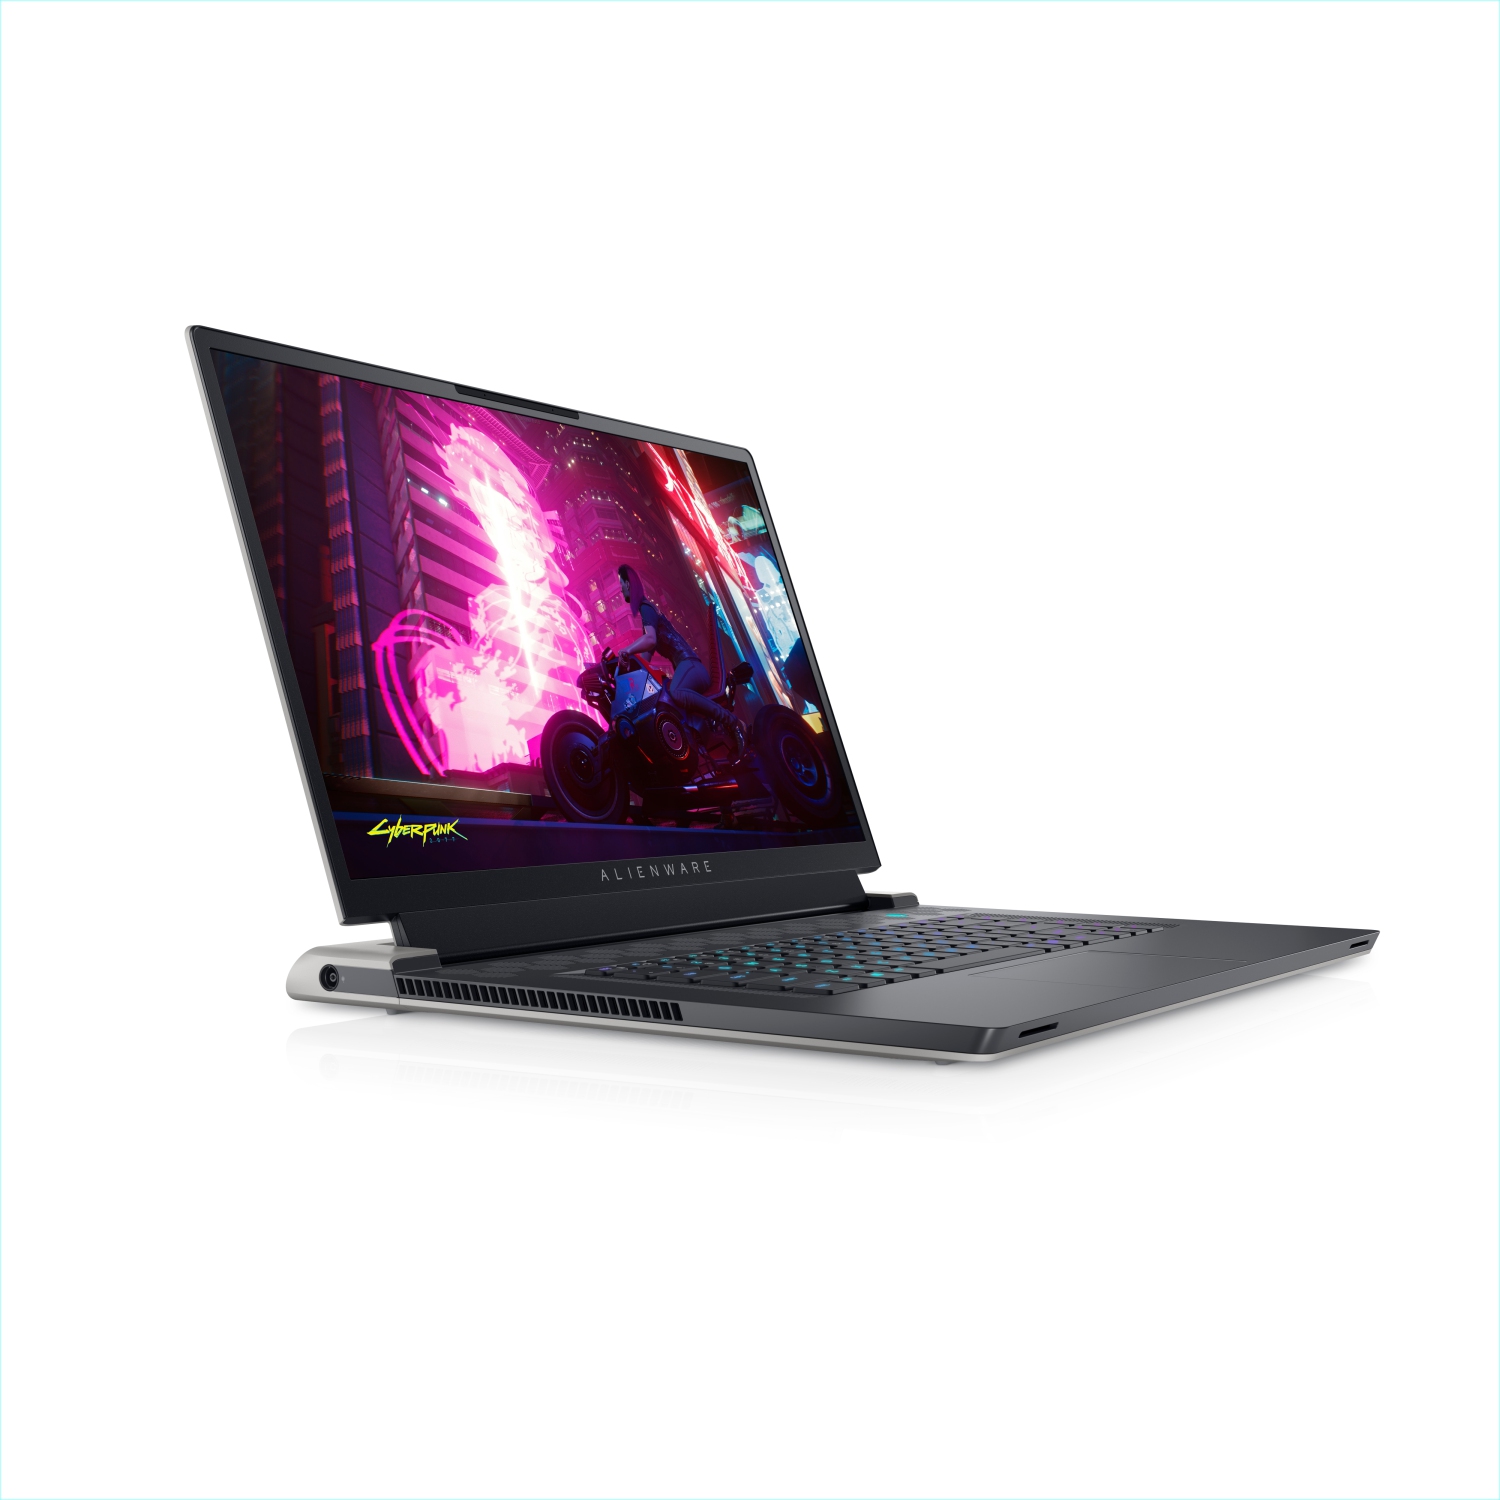 Refurbished (Excellent) – Dell Alienware X17 R1 Gaming Laptop (2021) | 17.3" FHD | Core i7 - 2TB SSD - 16GB RAM - RTX 3070 | 8 Cores @ 4.6 GHz - 11th Gen CPU - 8GB GDDR6